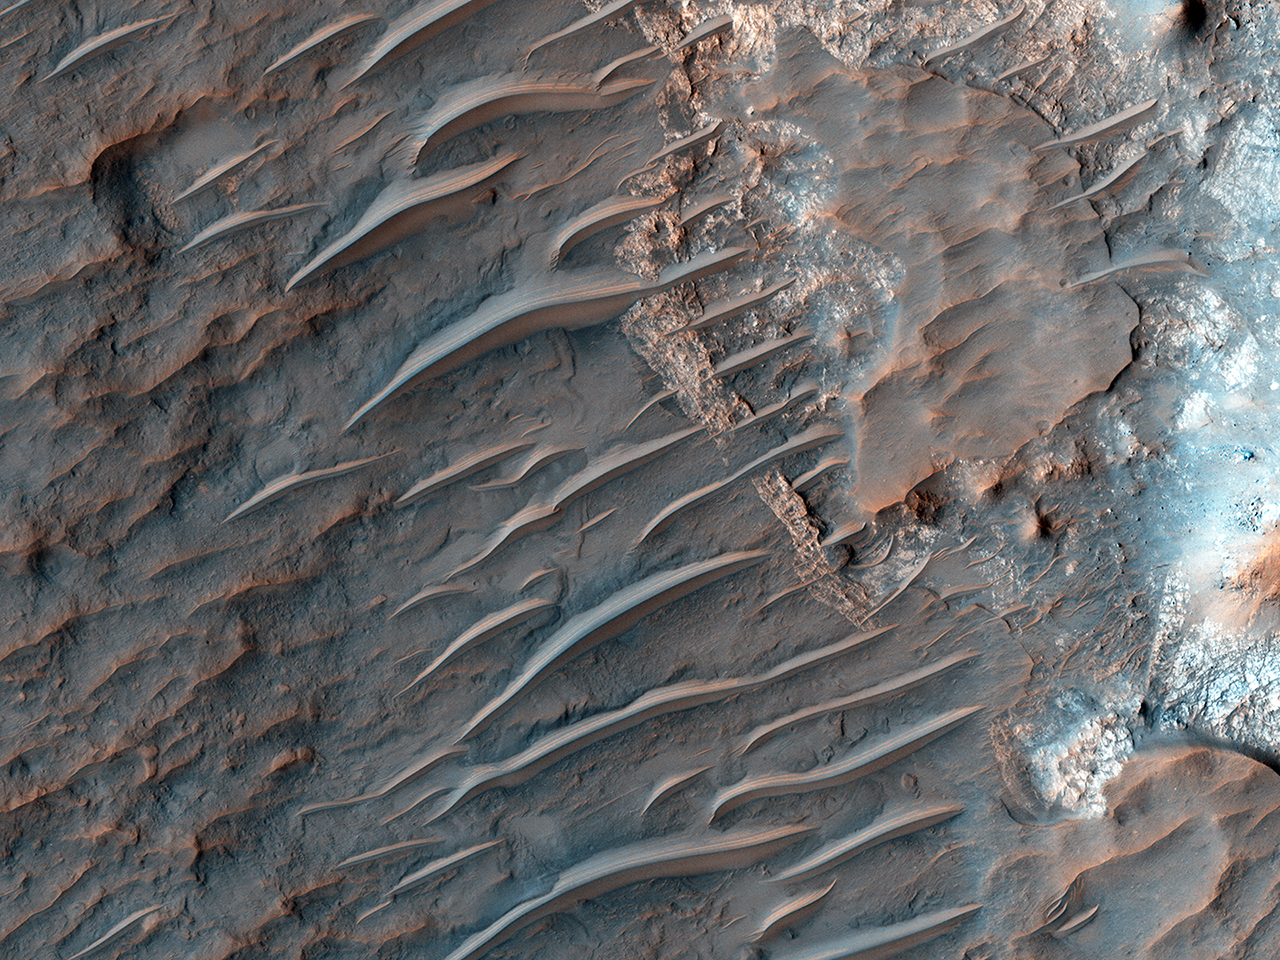 Nobody Knows How These Strange Ridges Appeared On Mars